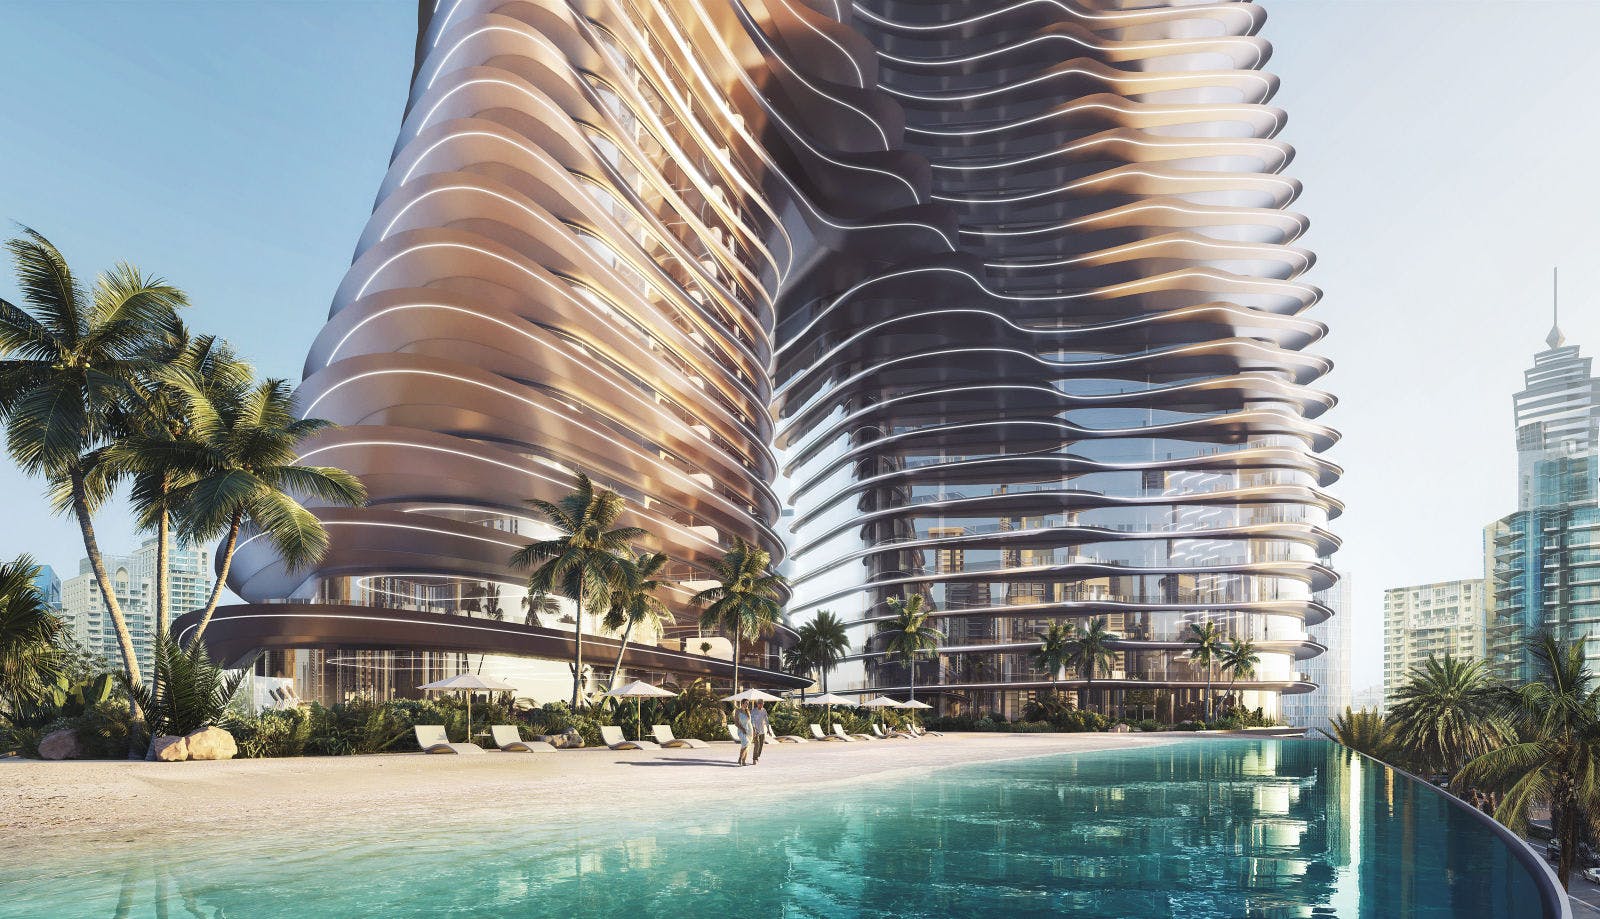 The first Bugatti residence is designed with peerless luxurious amenities, including a Riviera-inspired beach.